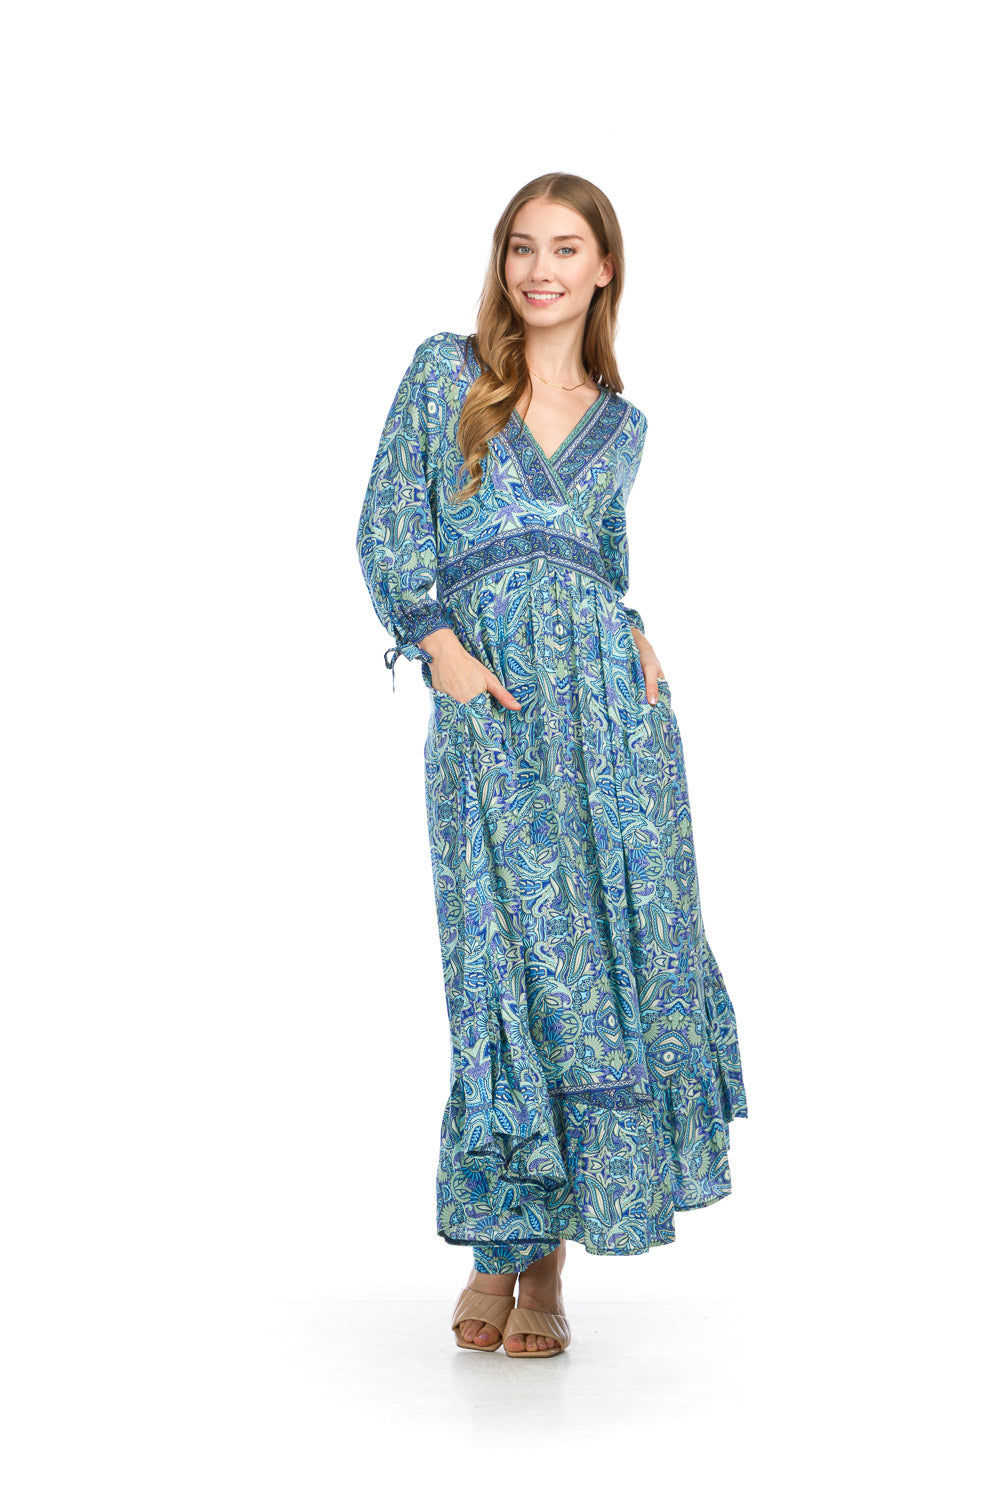 PD16673 BLUE Paisley Empire Waist Dress with Tie Sleeves